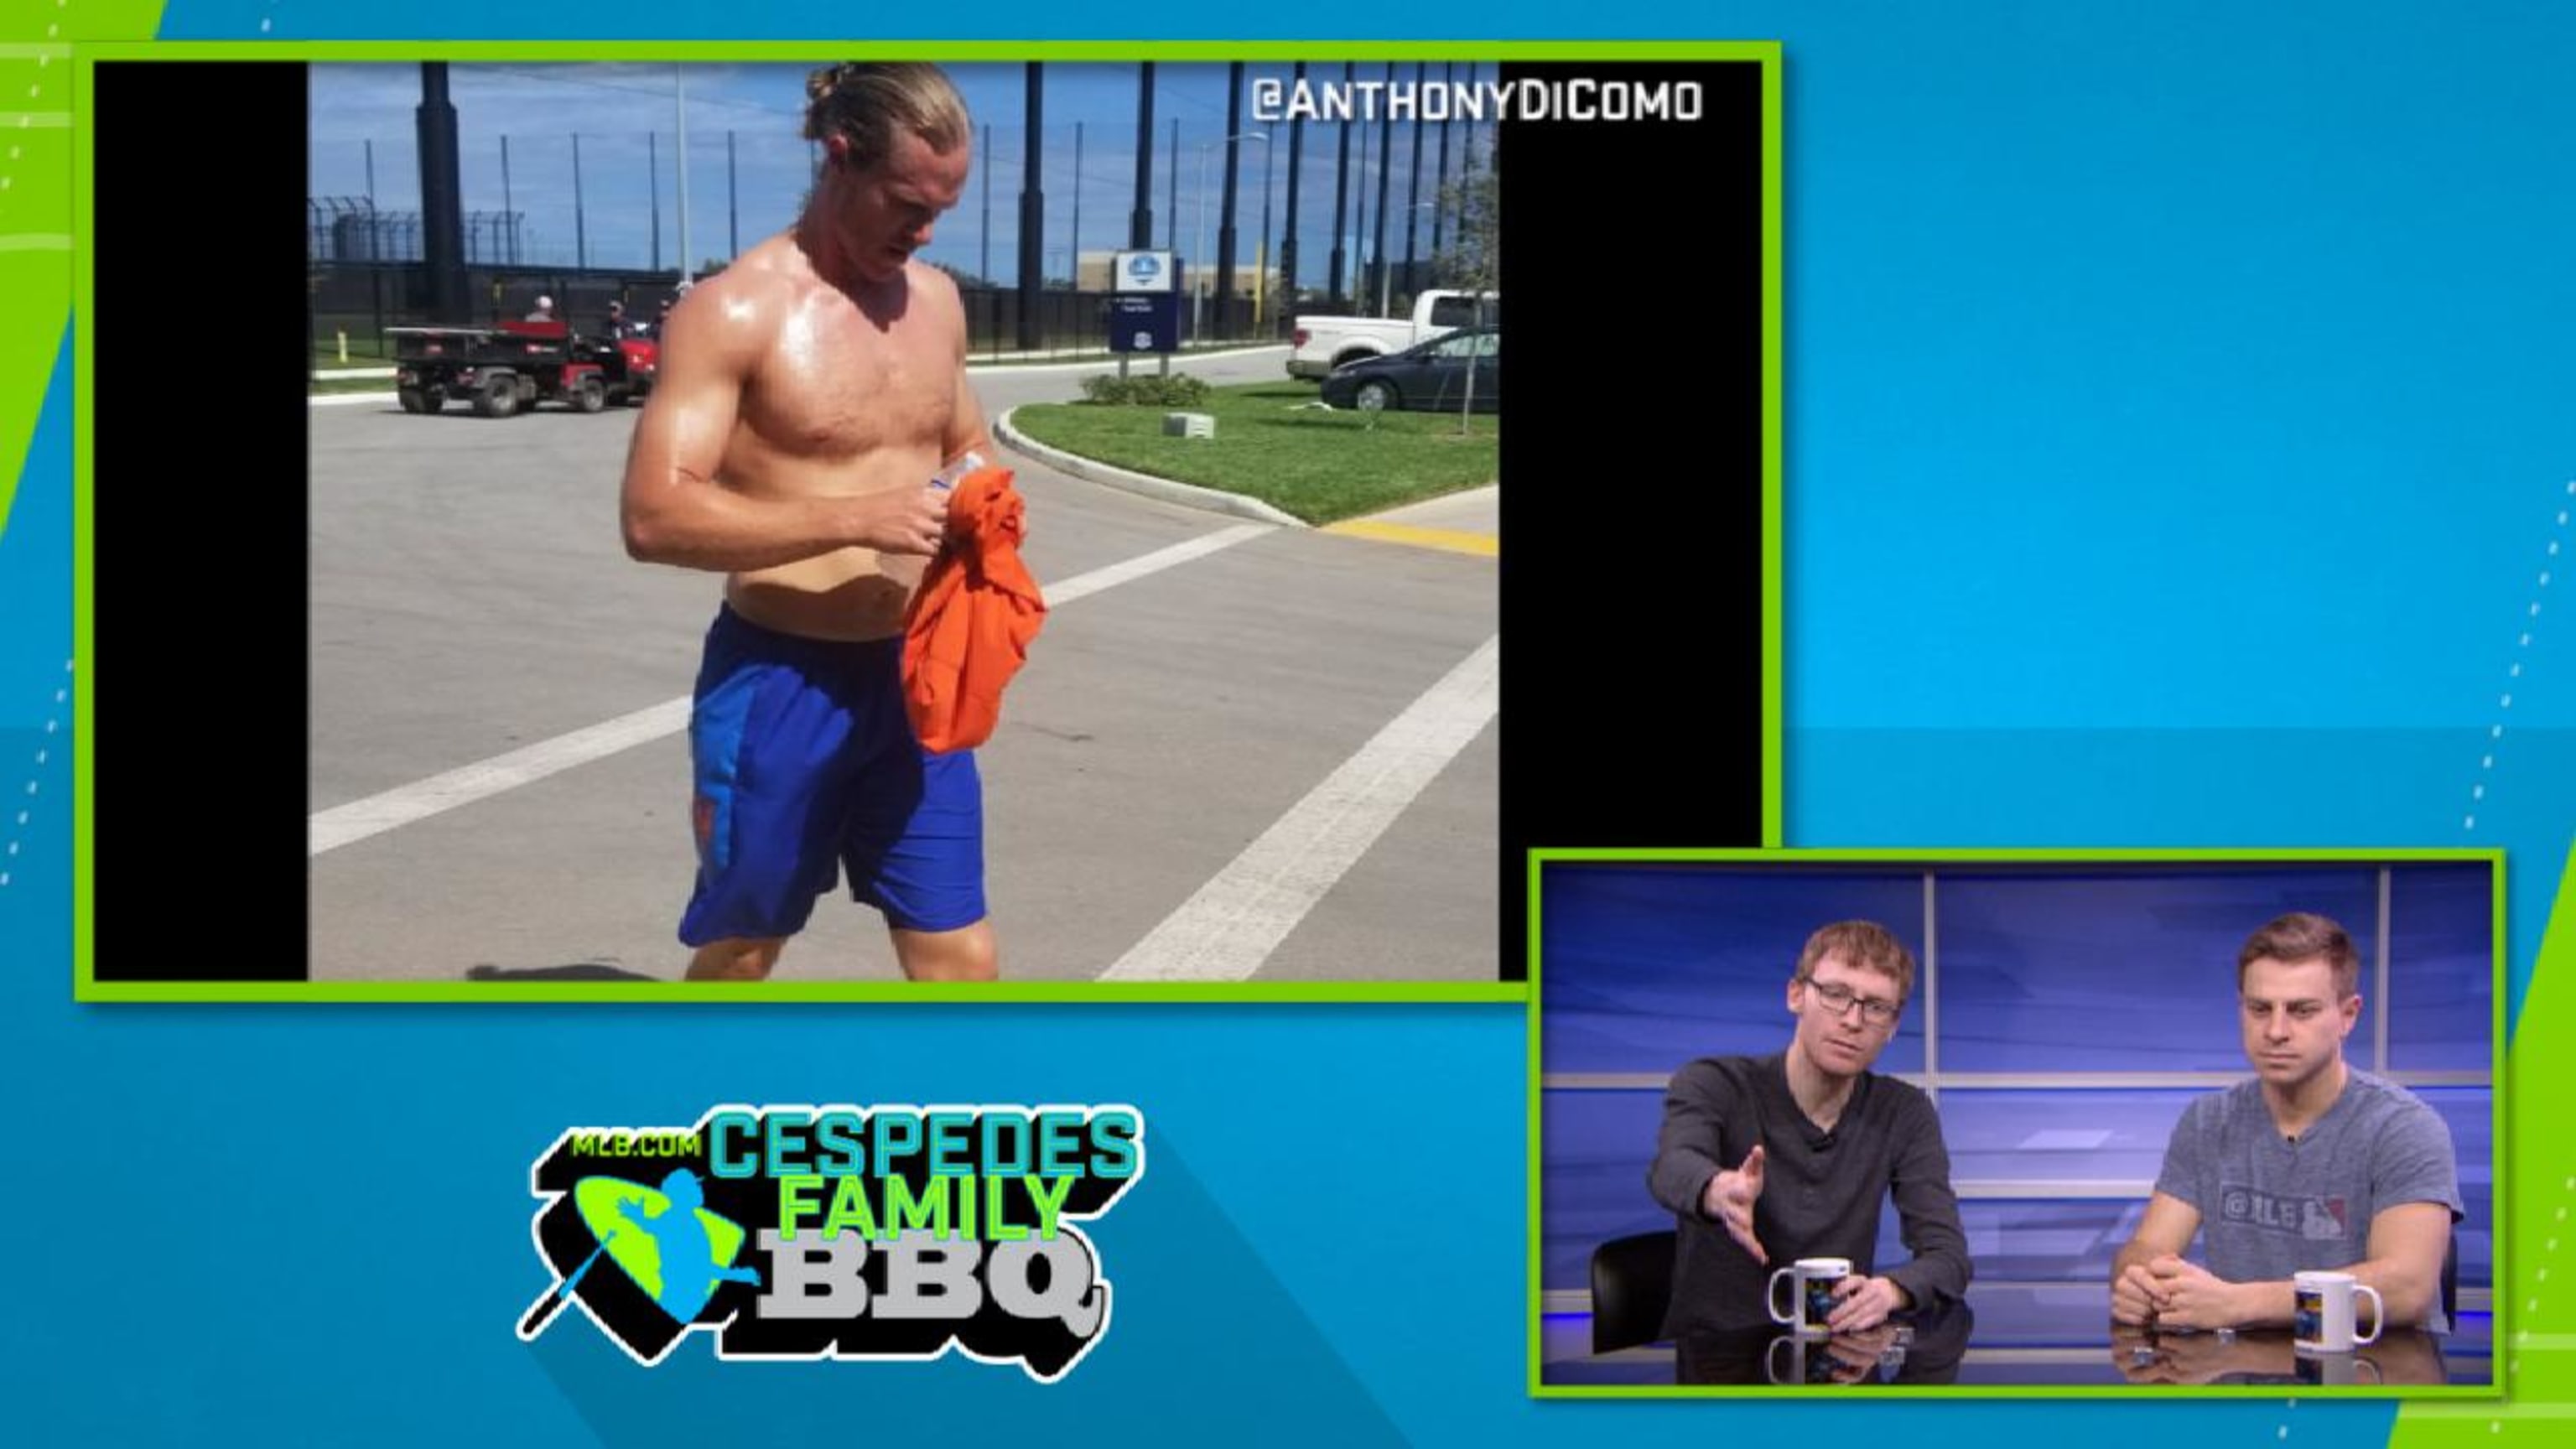 A shirtless Whit Merrifield participated on a fantastic Japanese game show